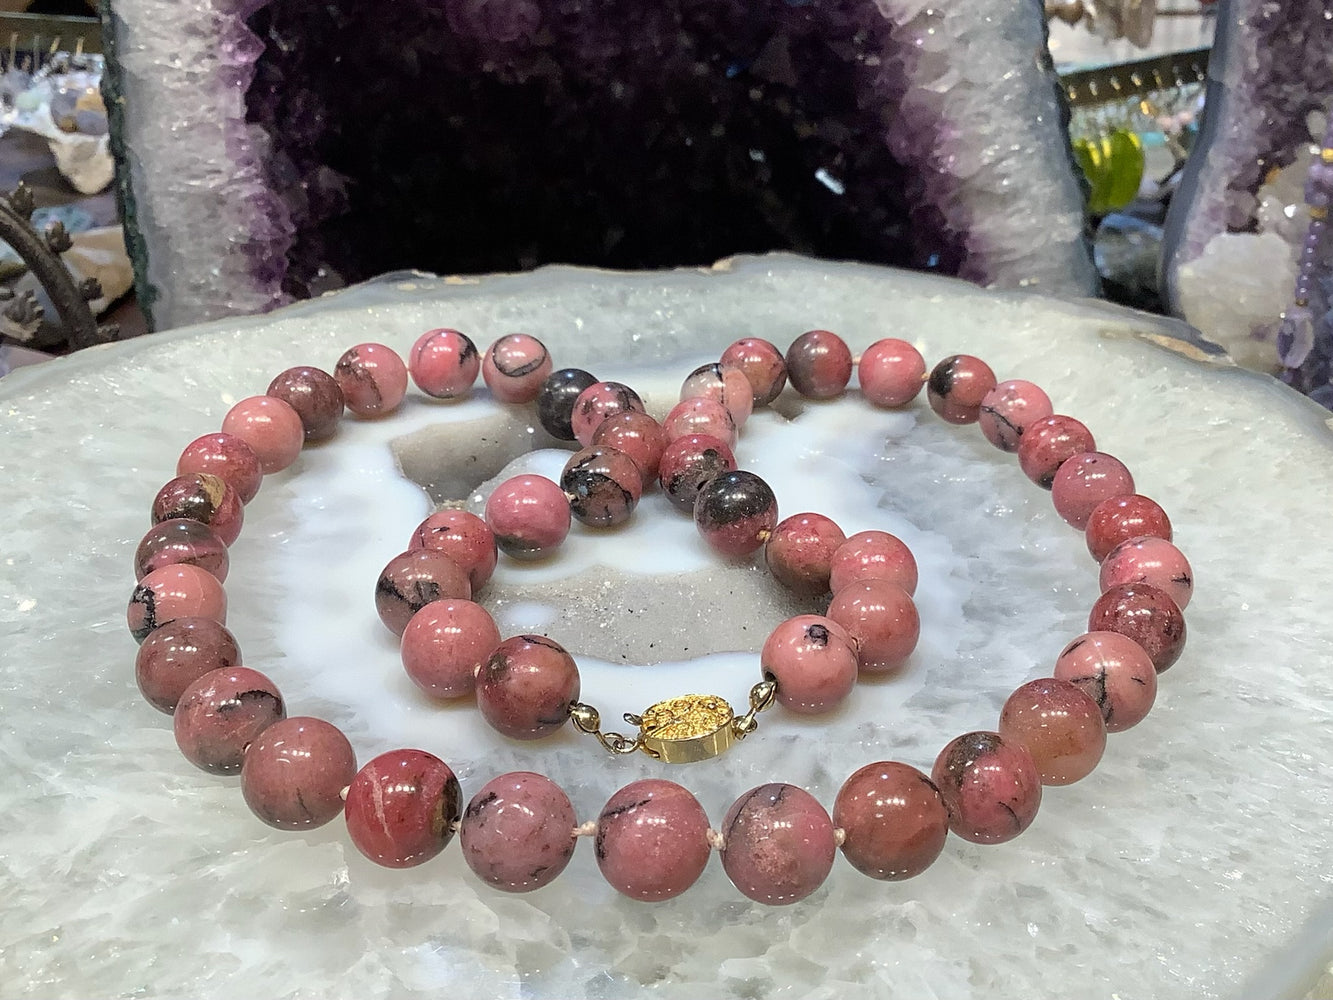 Stunning Vintage Pink Rhodonite Beads Knotted Necklace